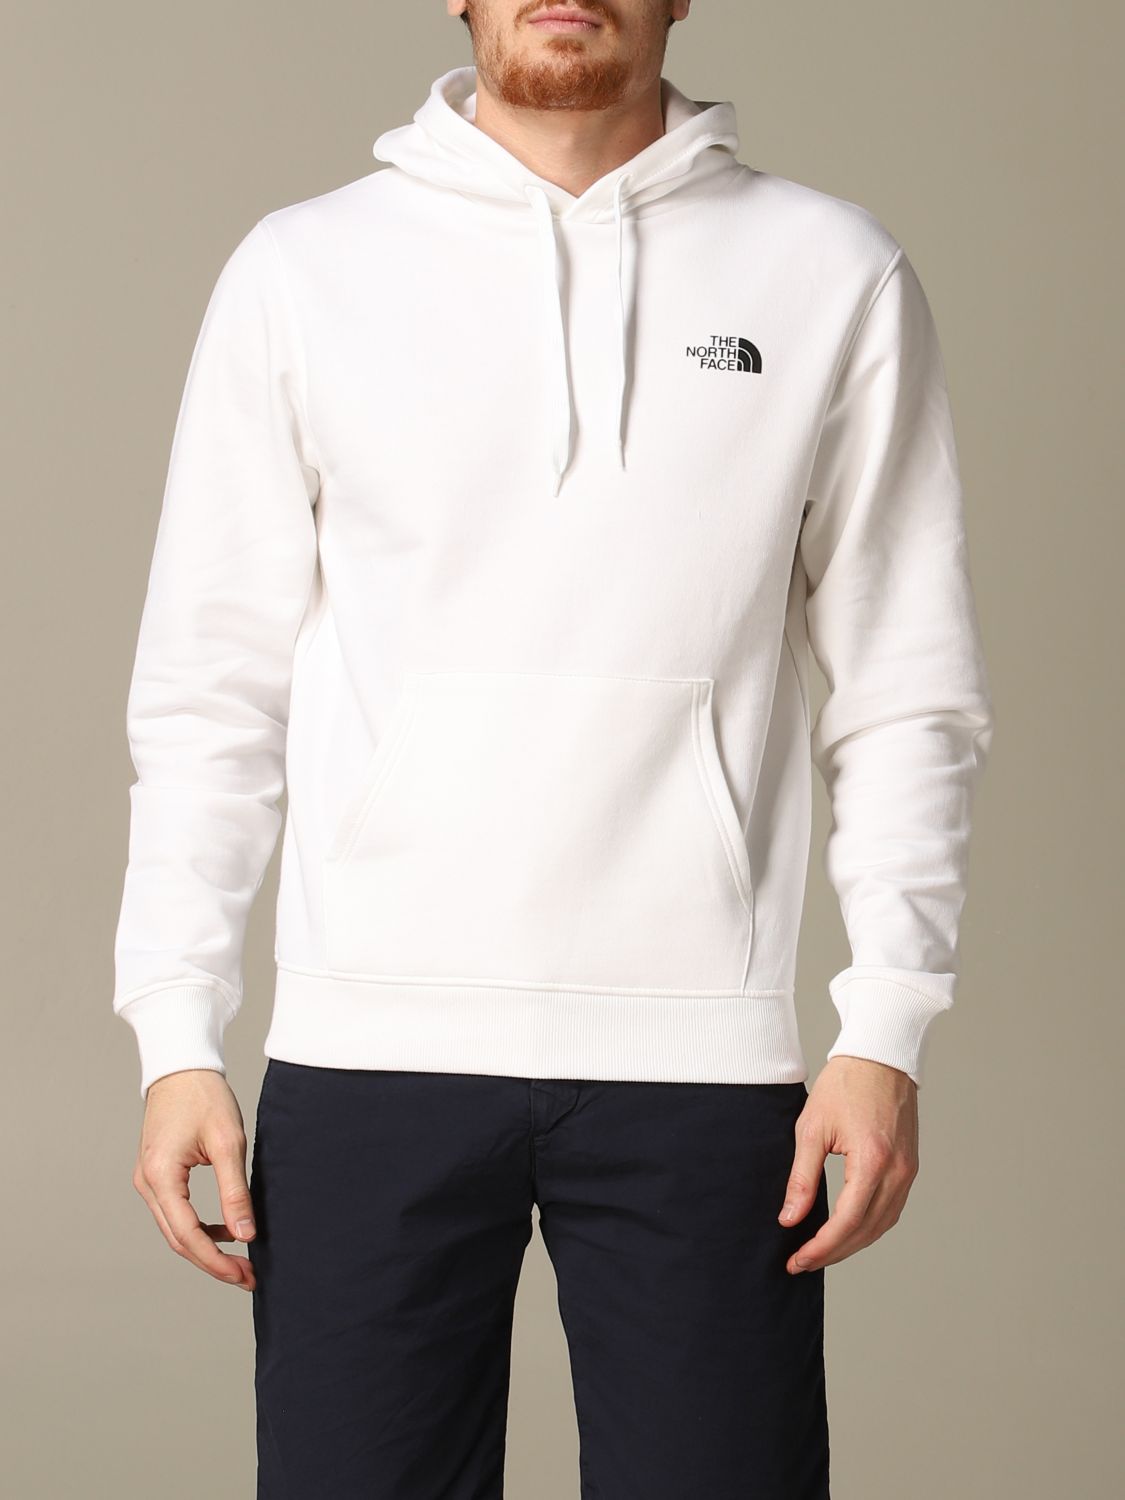 The North Face Outlet: sweatshirt for men - White | The North Face ...